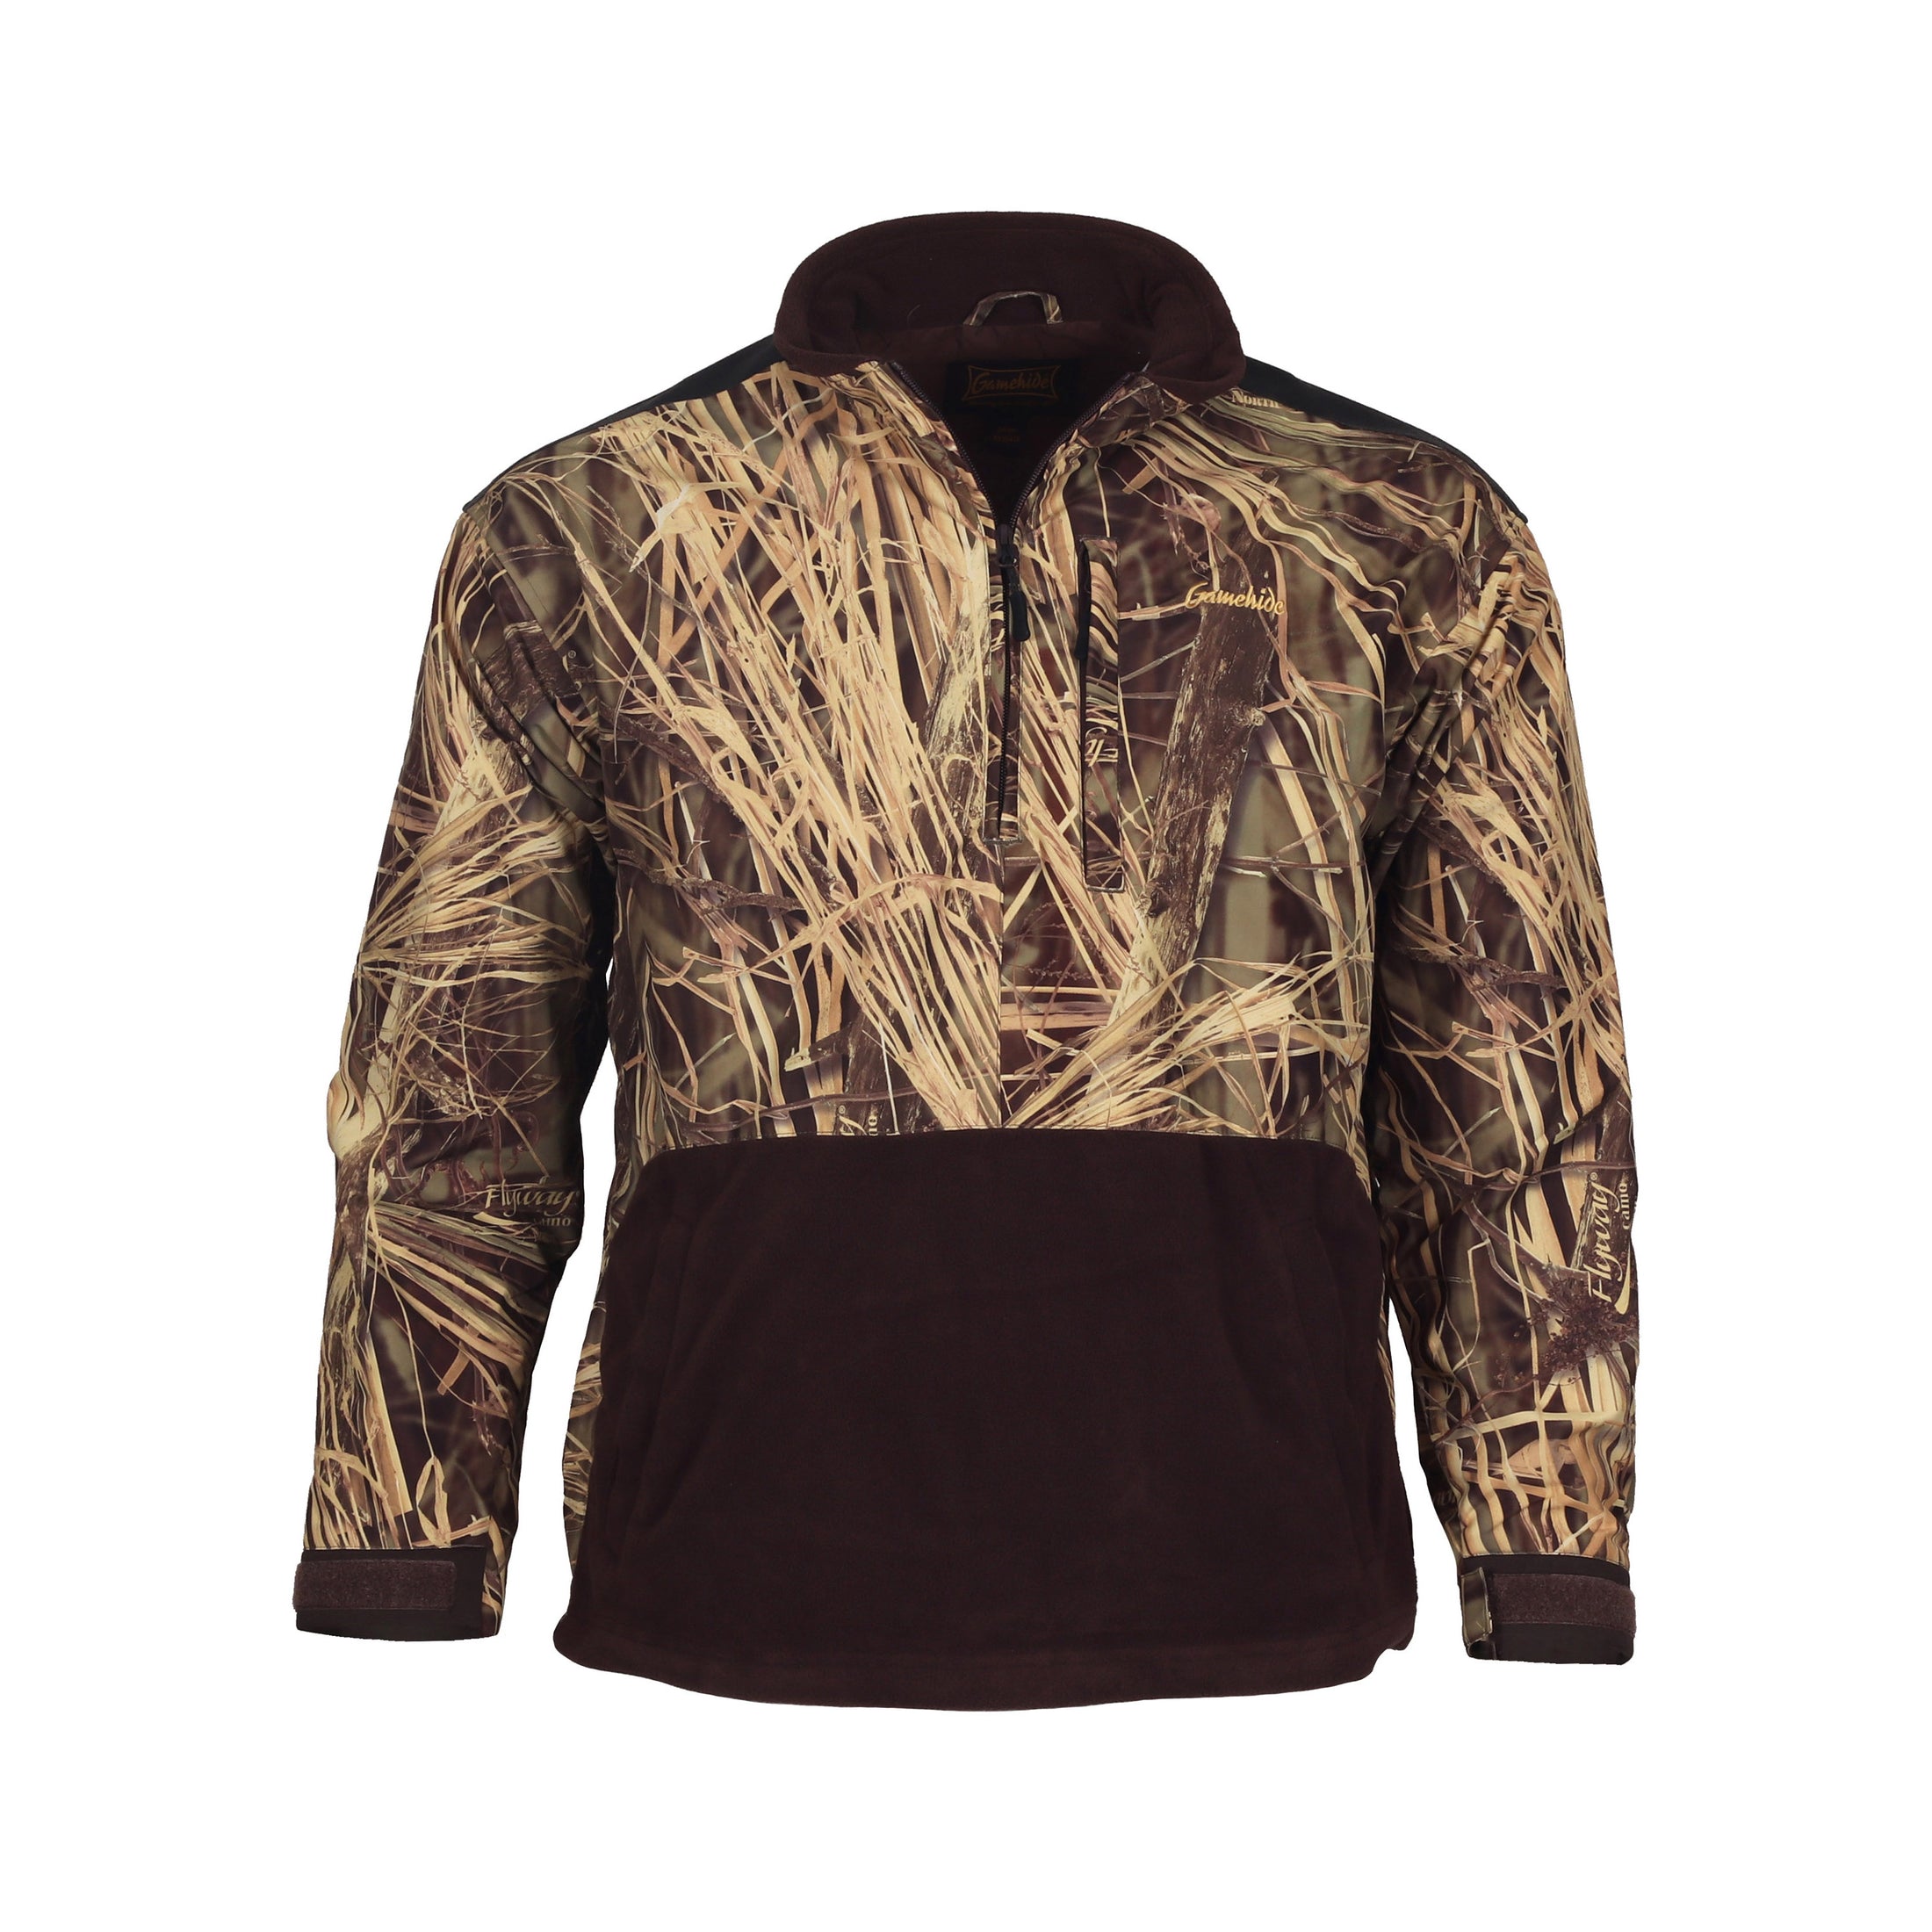 gamehide Marsh Lord Pullover front (flyway camo north)